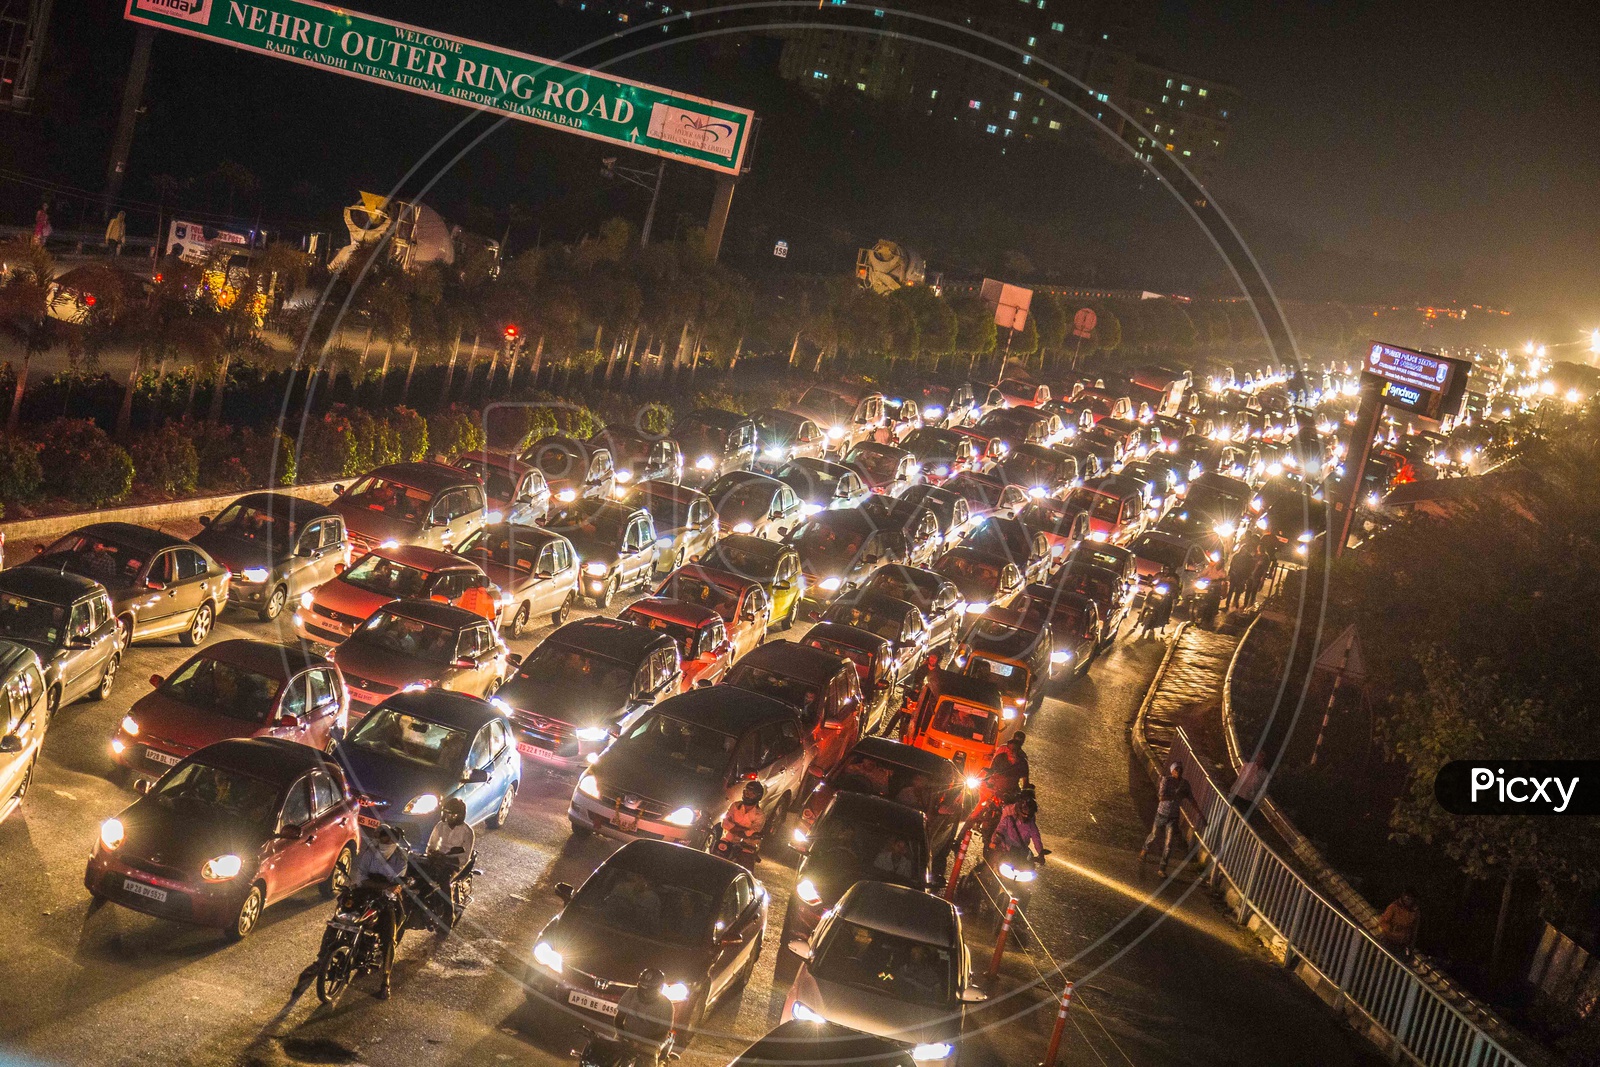 Vehicles struck in a heavy Traffic with their Headlights Glowing